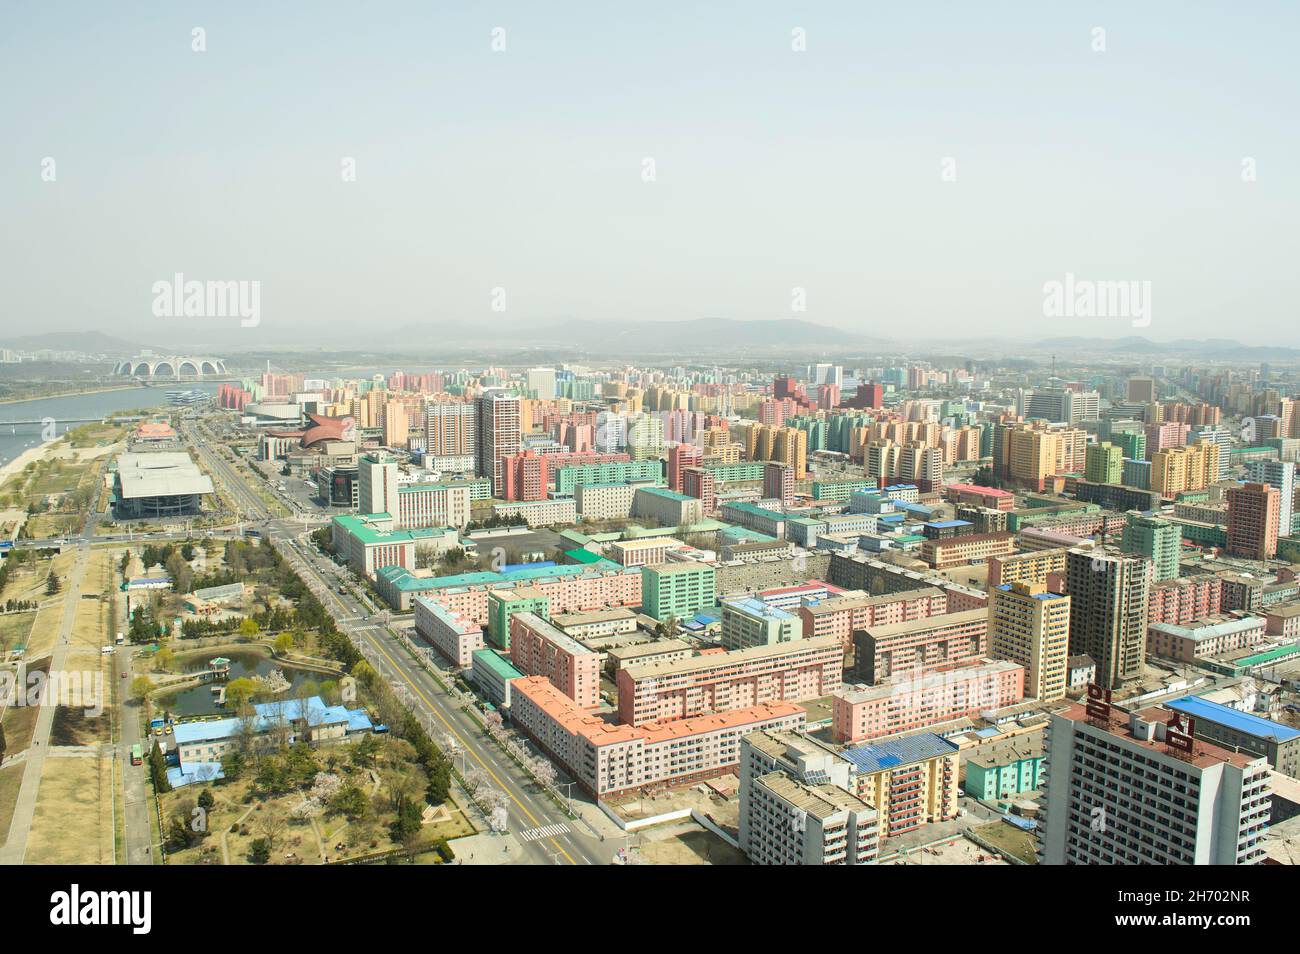 The view of colourful apartment blocks of central Pyongyang and the Taedong River seen from the top of the Juche Tower in North Korea. Stock Photo